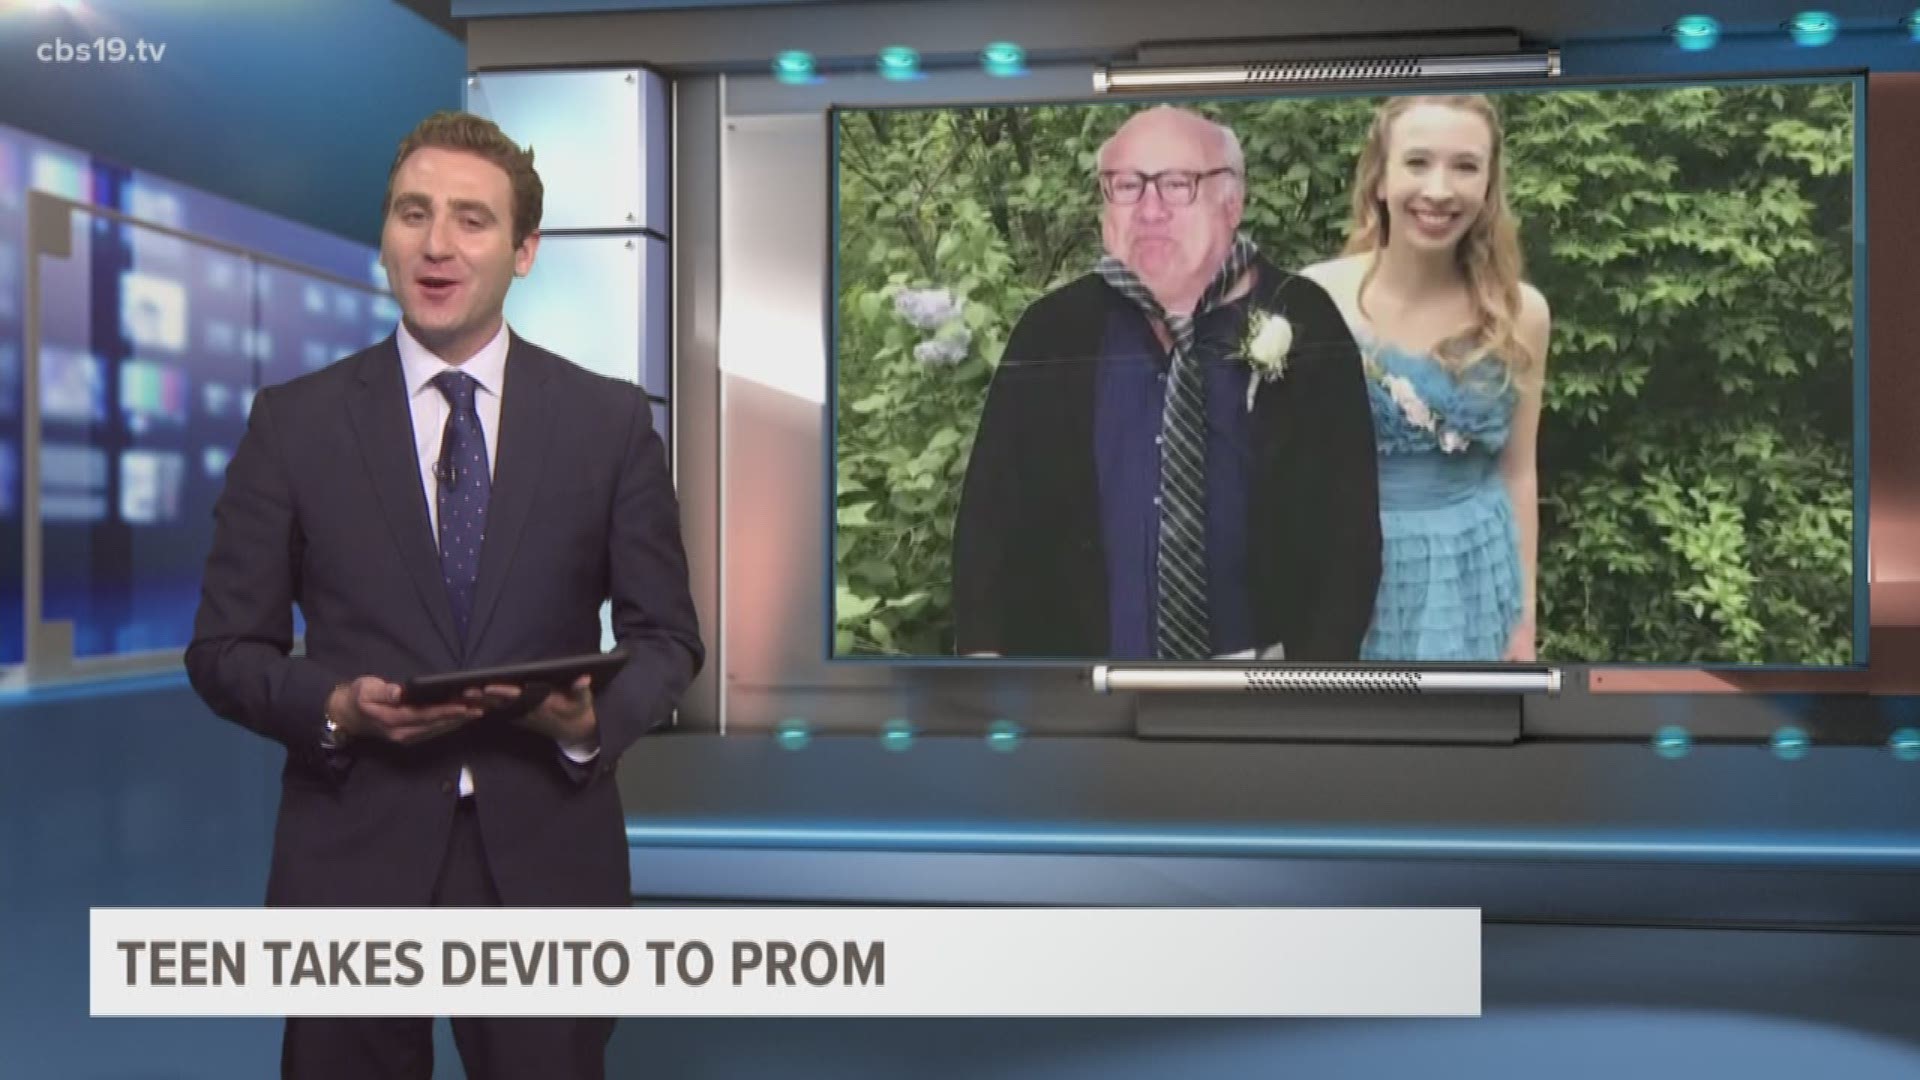 A teen without a date is trending, after taking a cardboard cutout of Danny DeVito to prom.